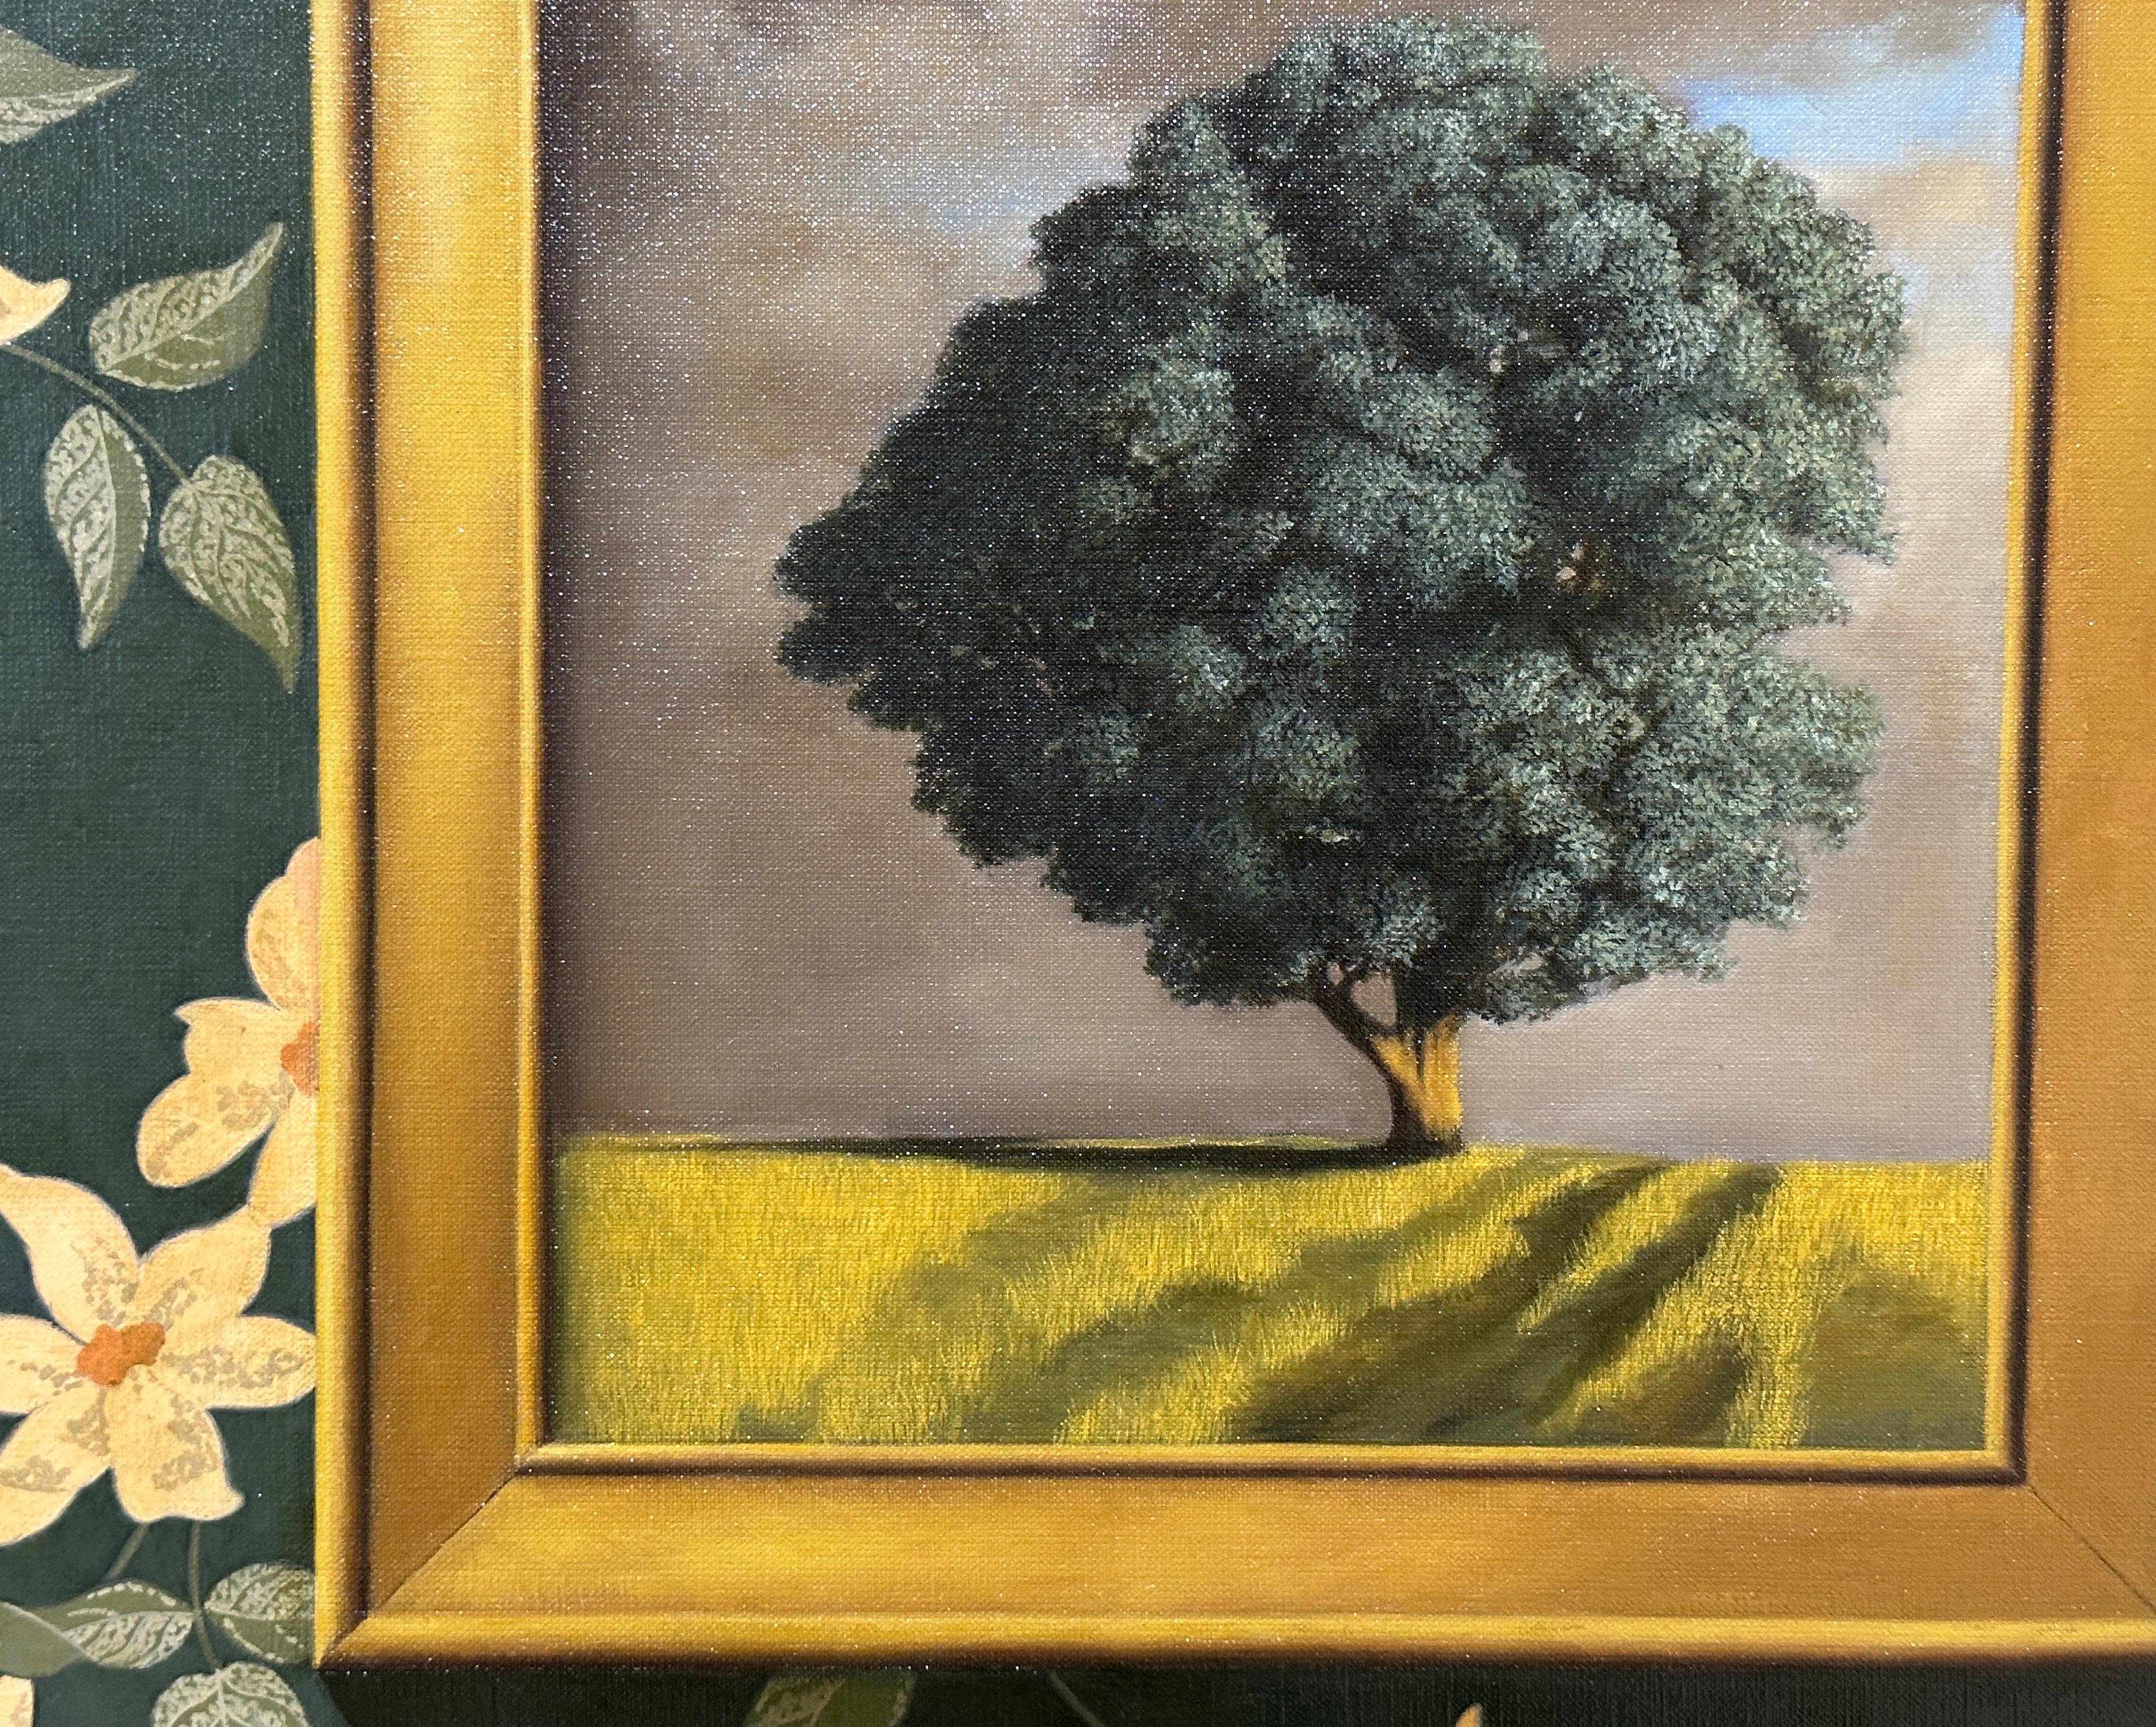 WALLPAPER, FRAME, TREE - Realism / Trompe L'œil / Landscape / Still Life - Contemporary Painting by Edward Butler